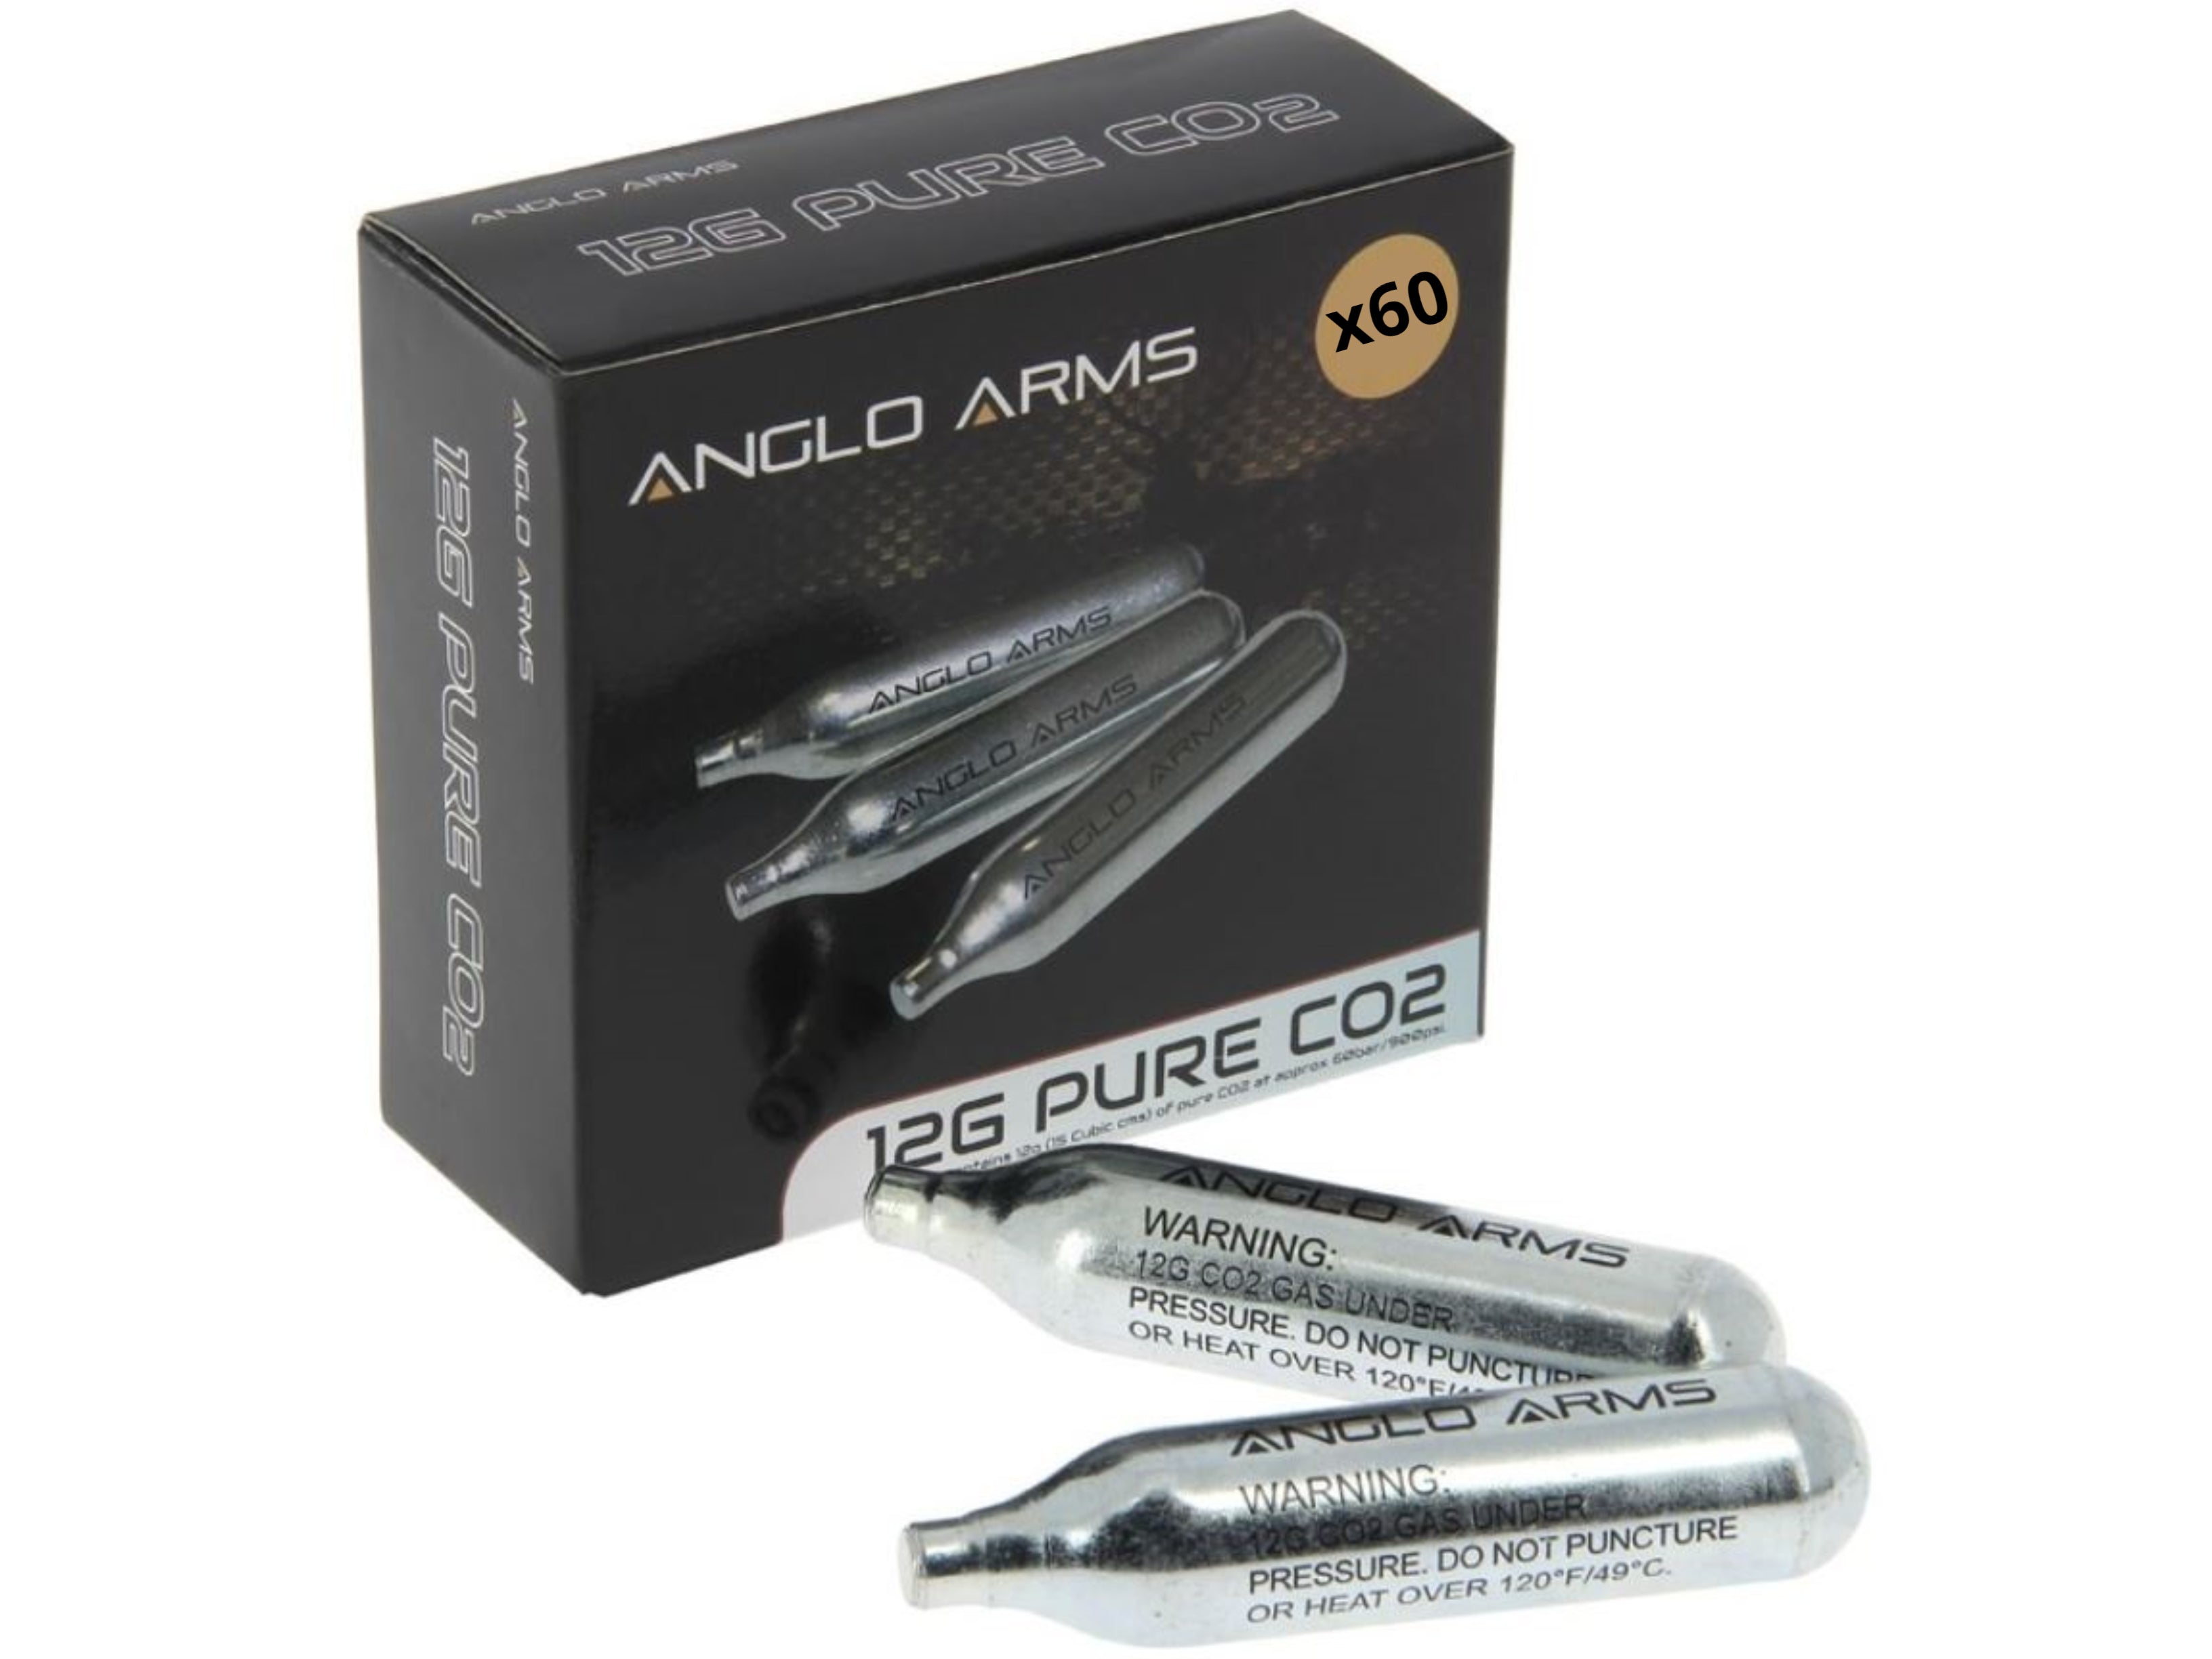 ANGLO ARMS 60 X ANGLO ARMS 12G GRAM CO2 CAPSULE CARTRIDGE SET